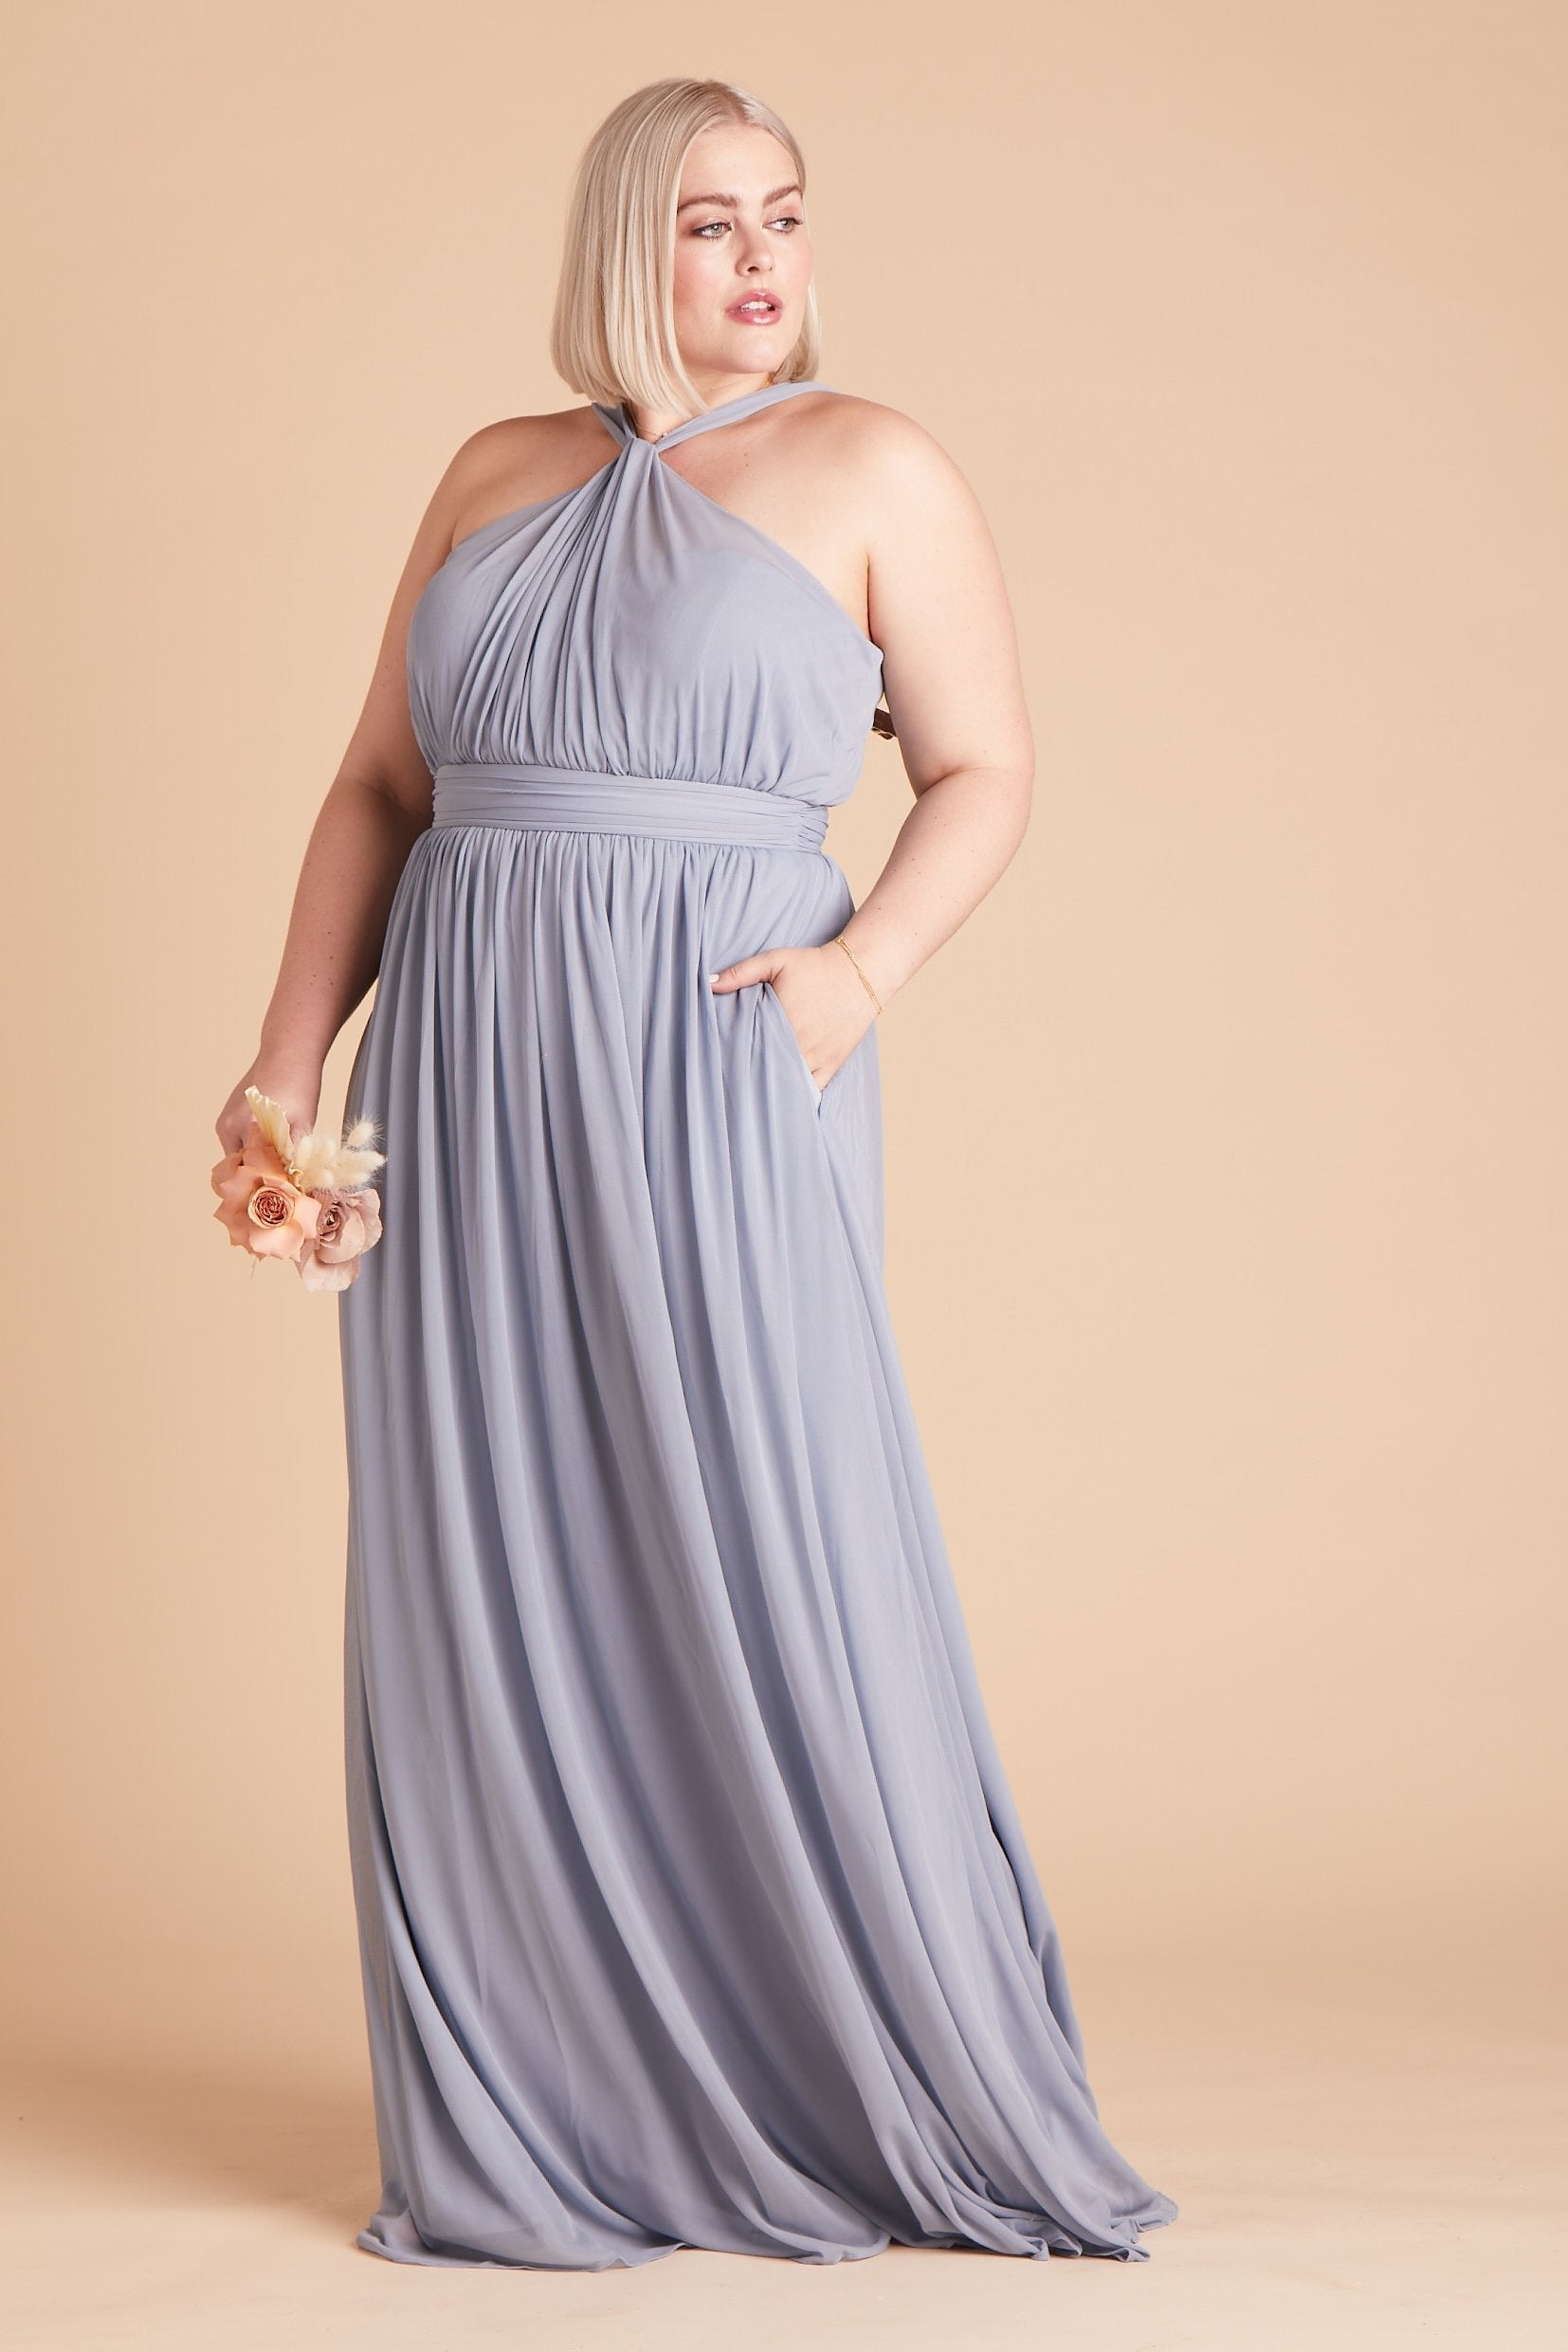 Kiko plus size bridesmaid dress in dusty blue chiffon by Birdy Grey, front view with hand in pocket